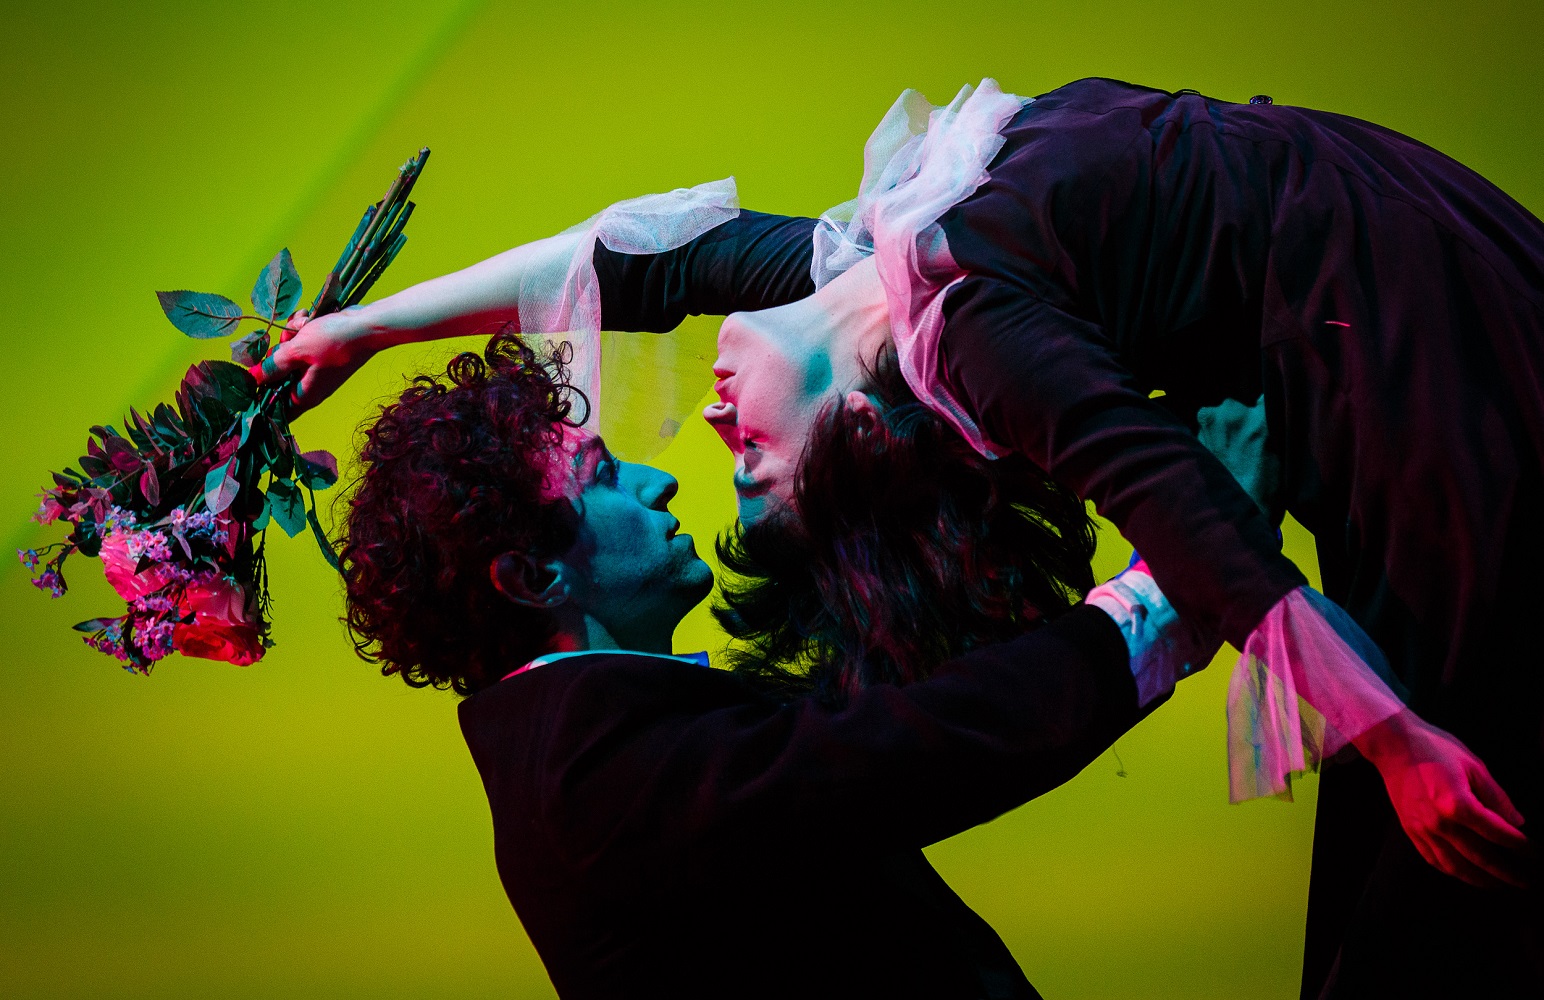 Marc Antolin as Marc Chagall and Audrey Brisson as Bella Chagall in "The Flying Lovers of Vitebsk" -  Photo by Steve Tanner, courtesy of The Wallis